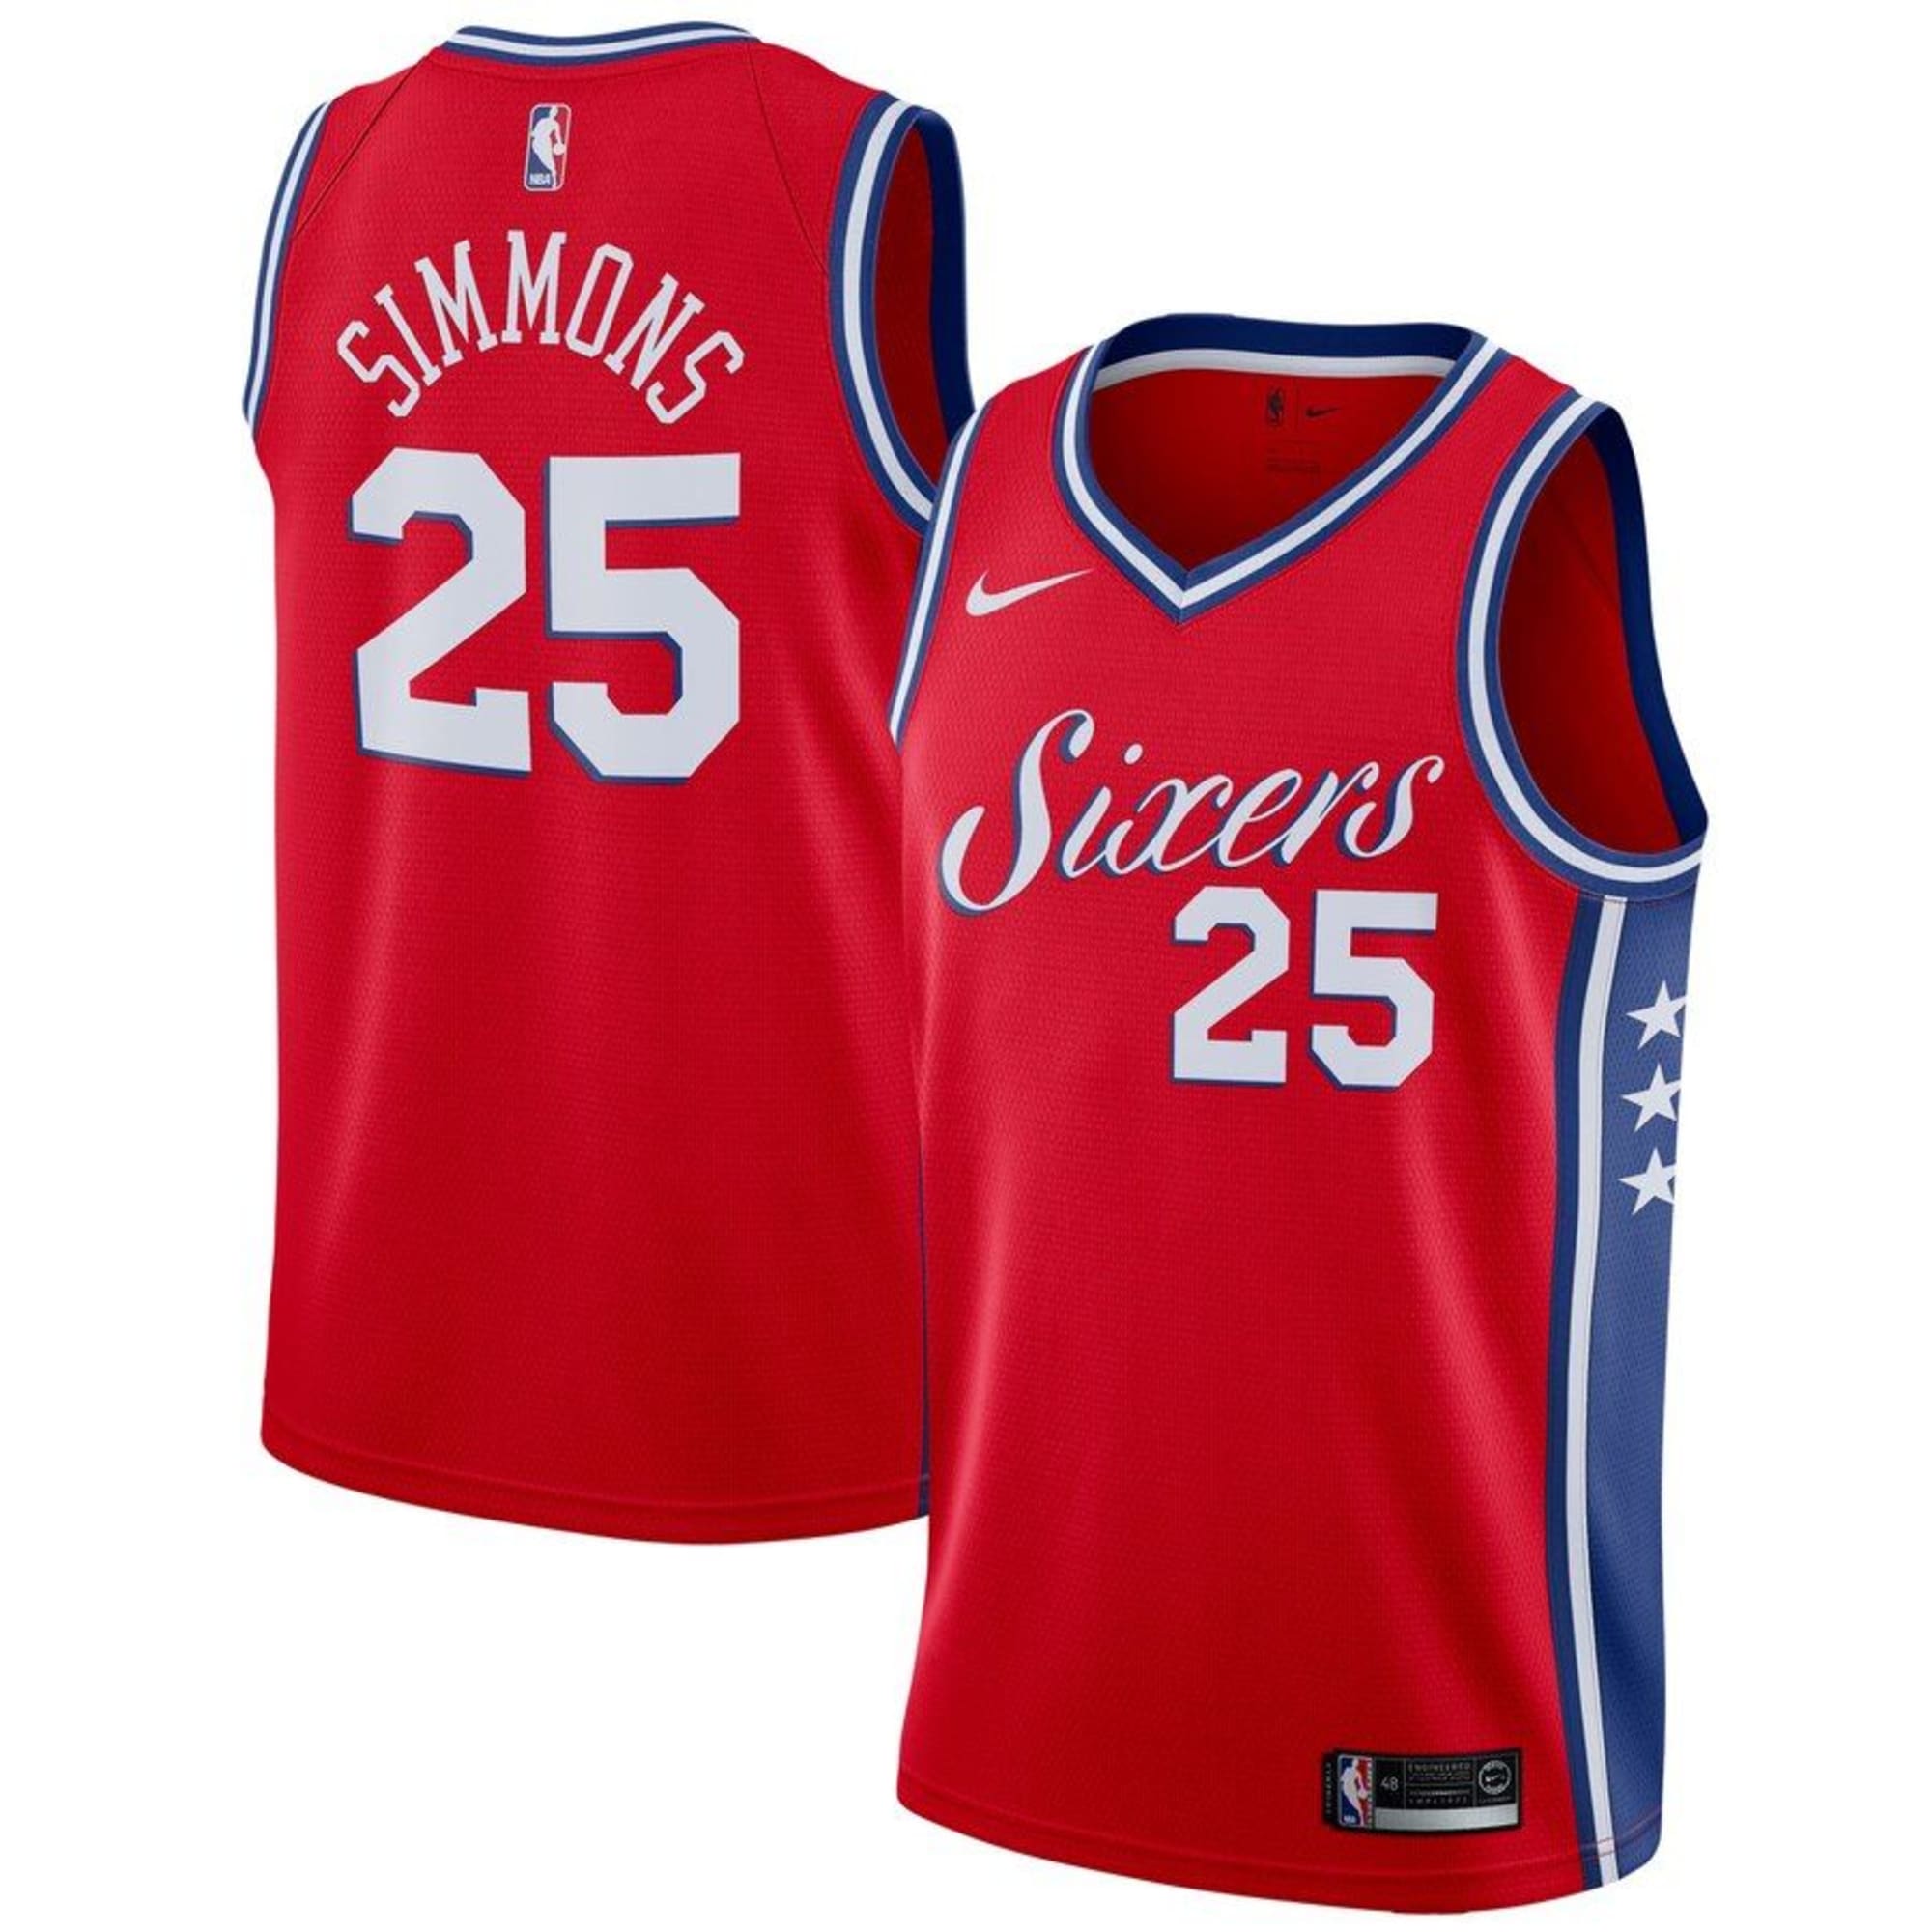 sixers jersey colors